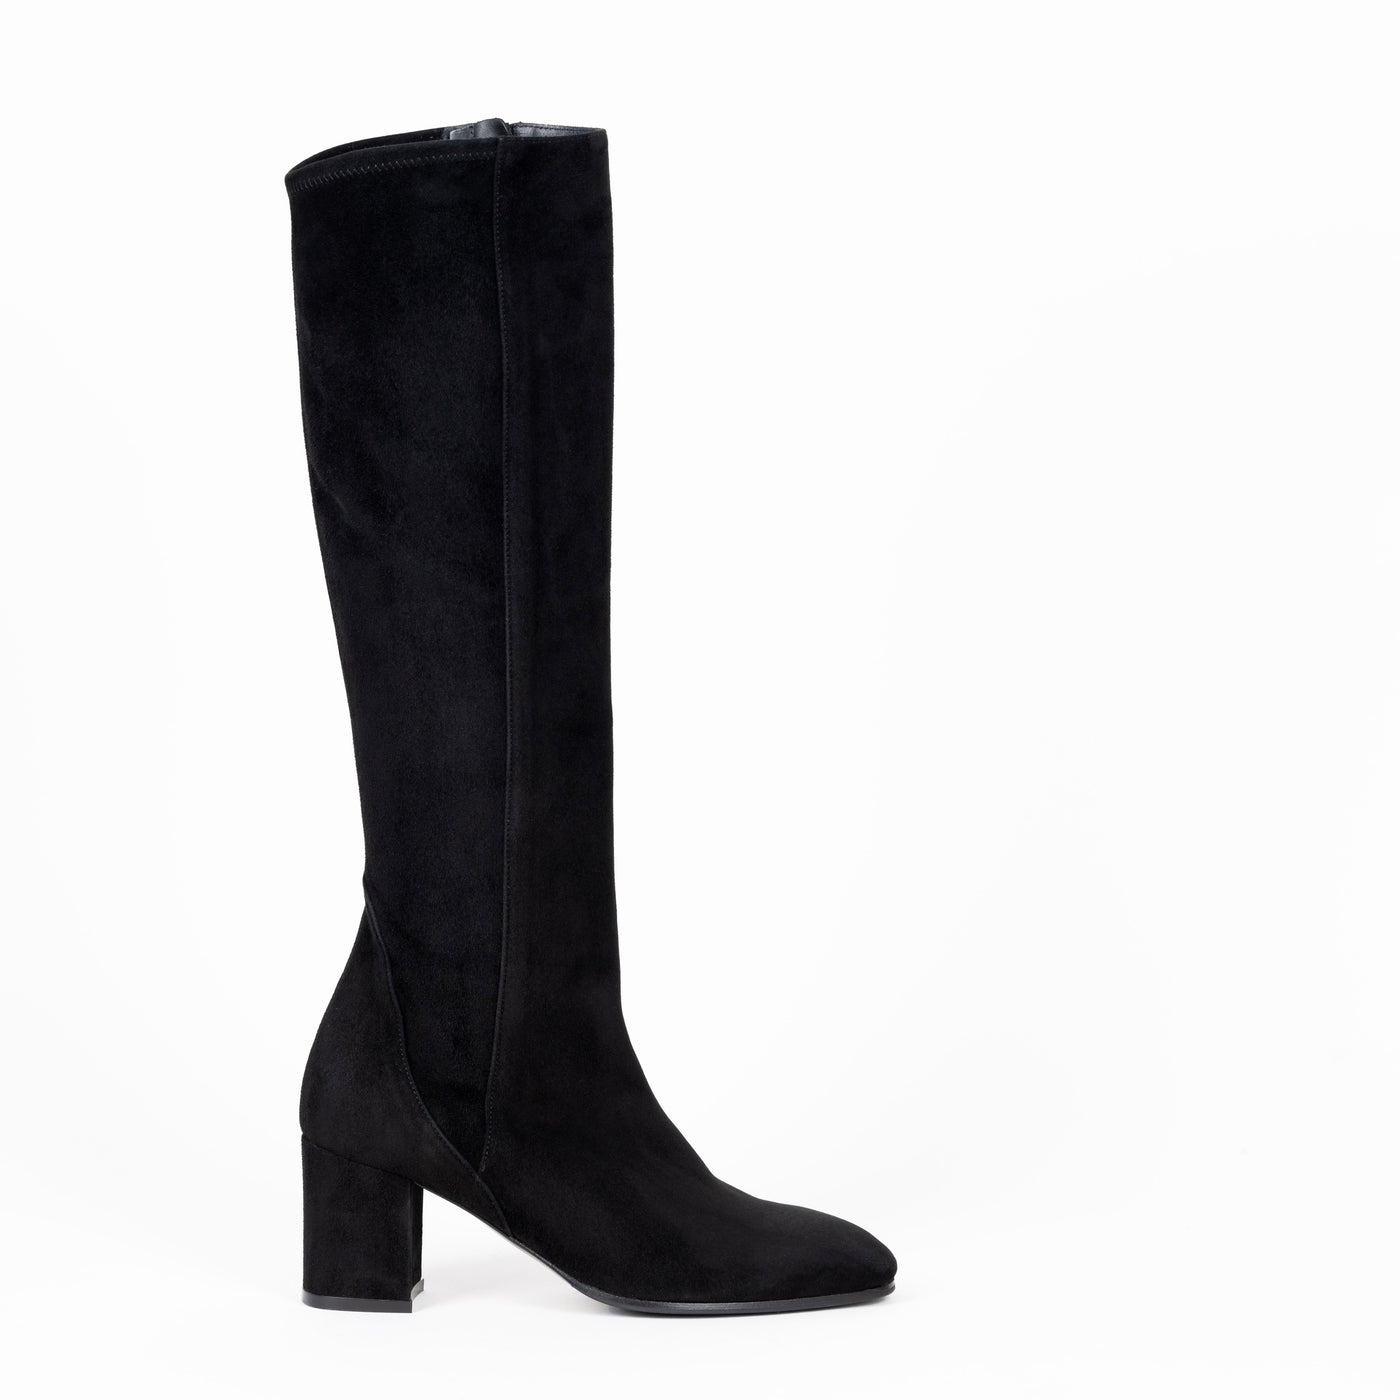 Black Suede Stretch Boots